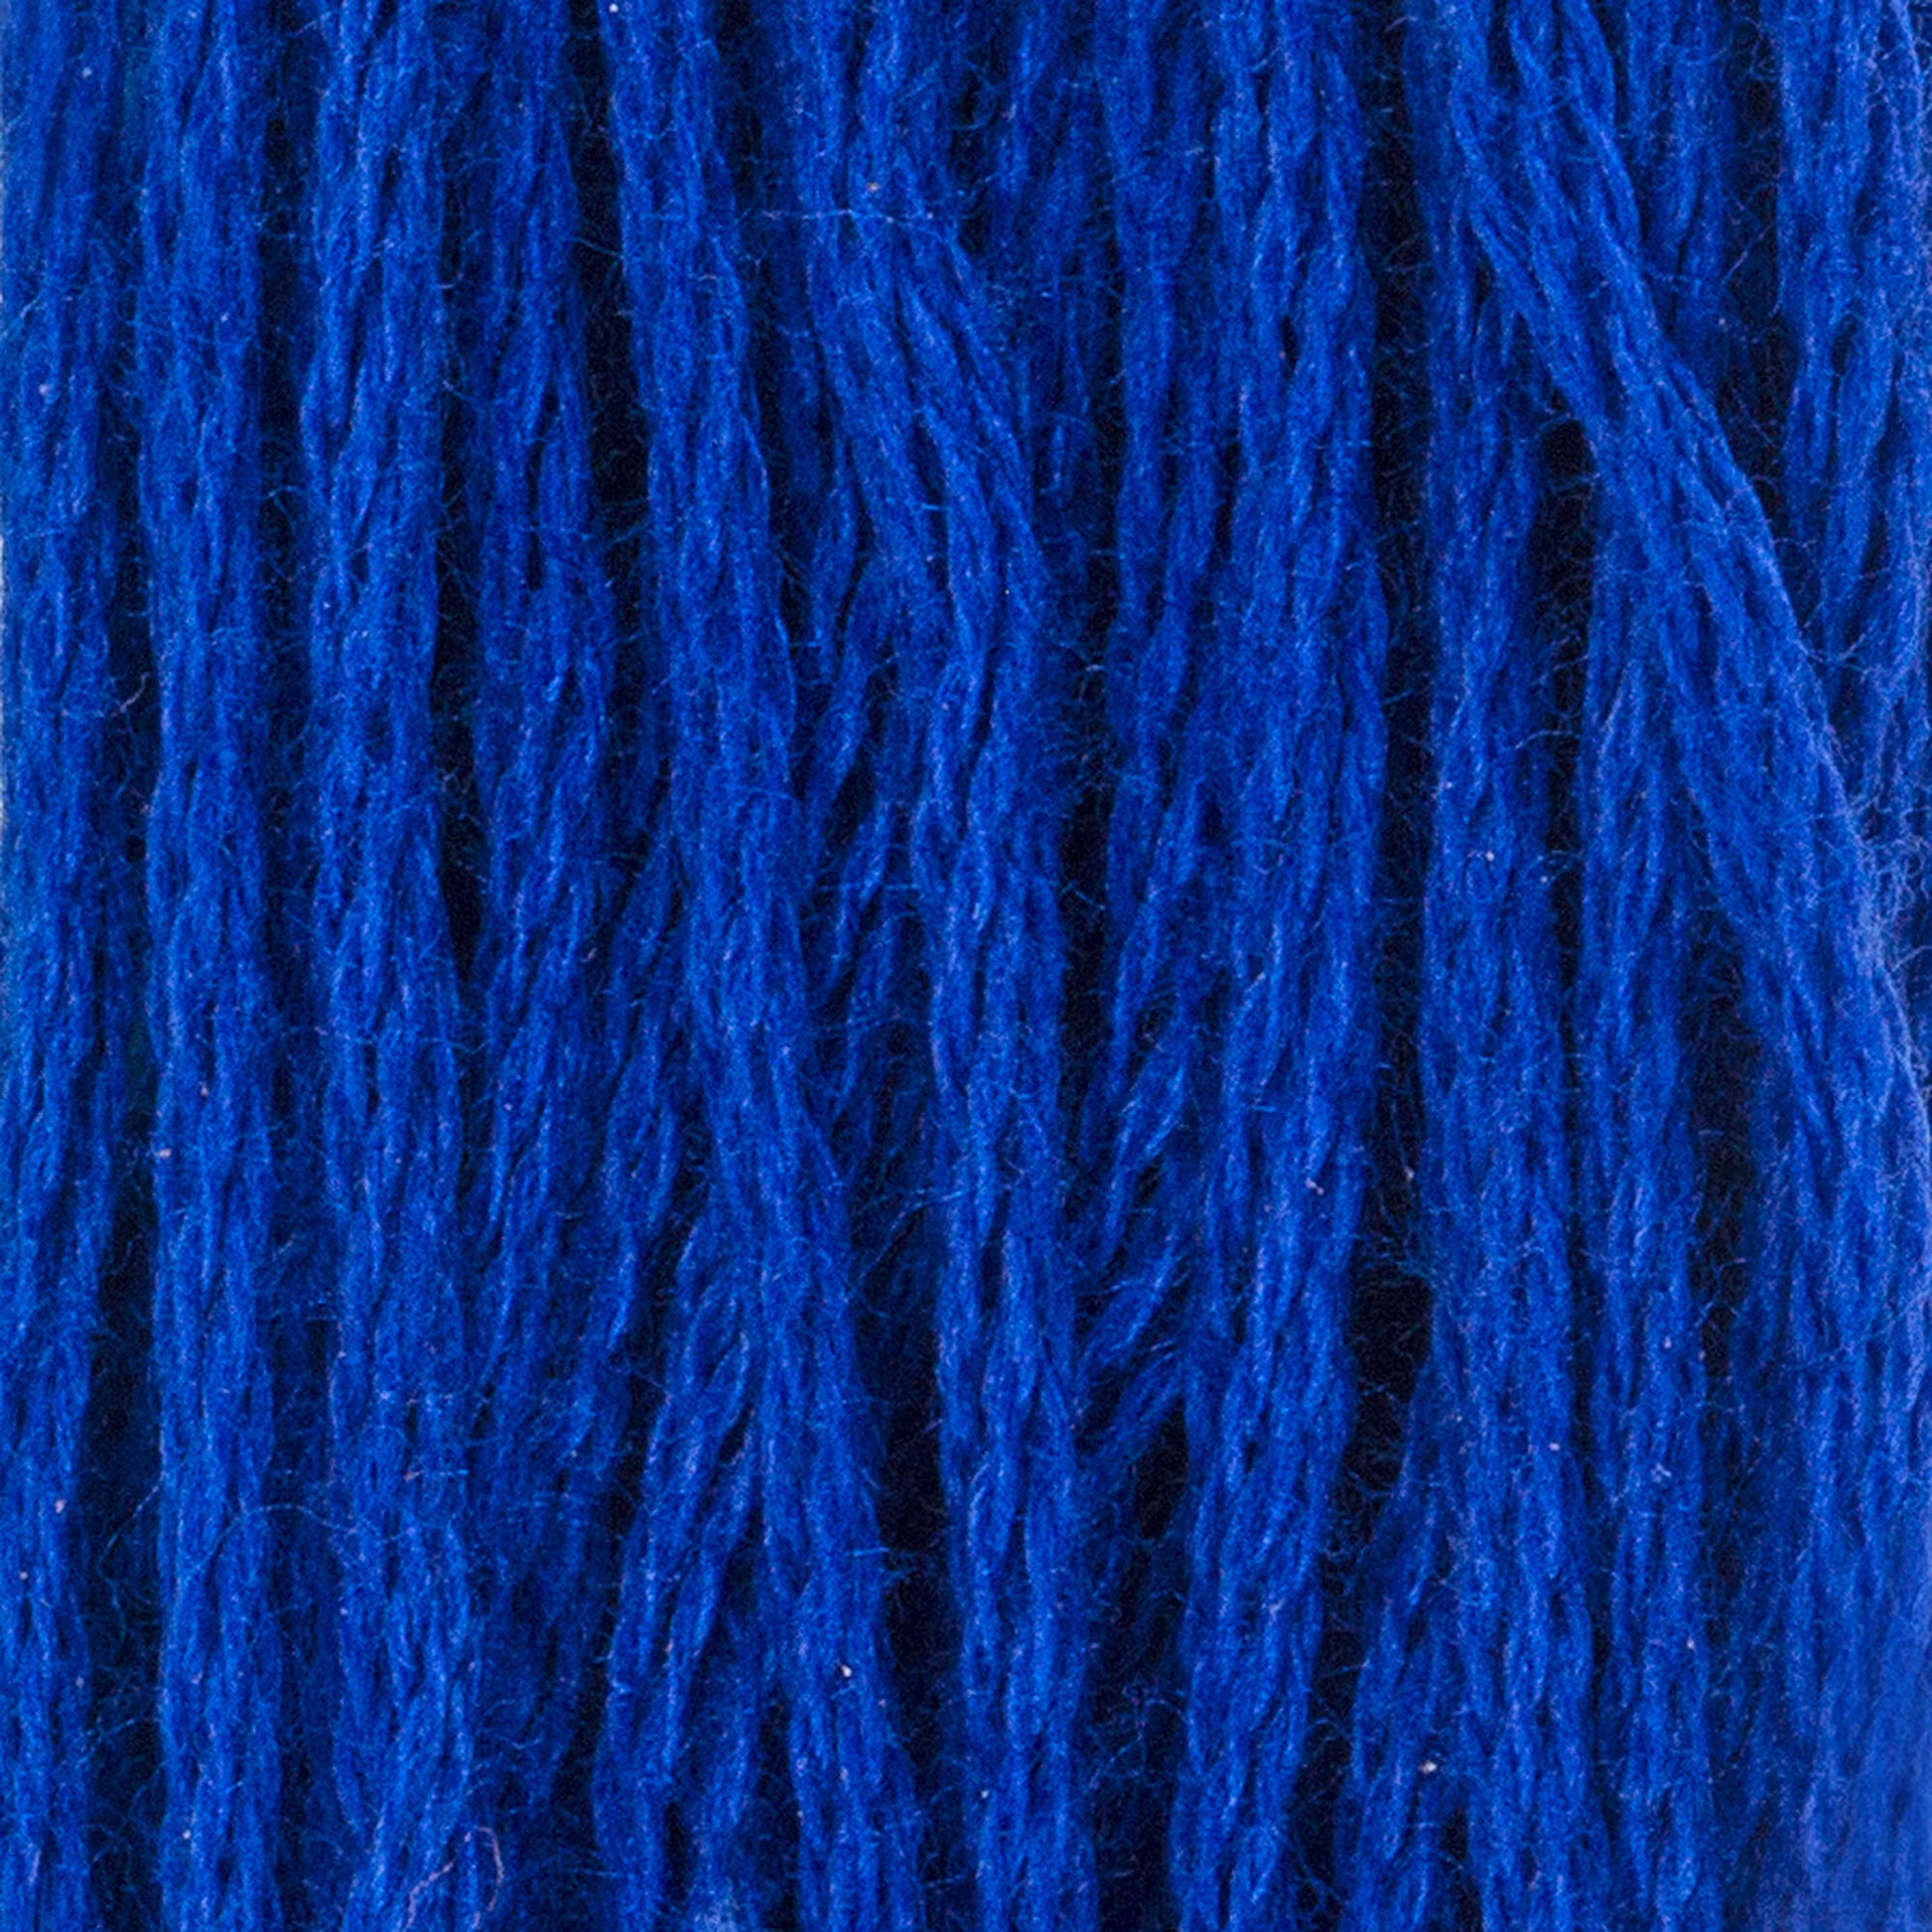 Coats & Clark Cotton Embroidery Floss Blue Med